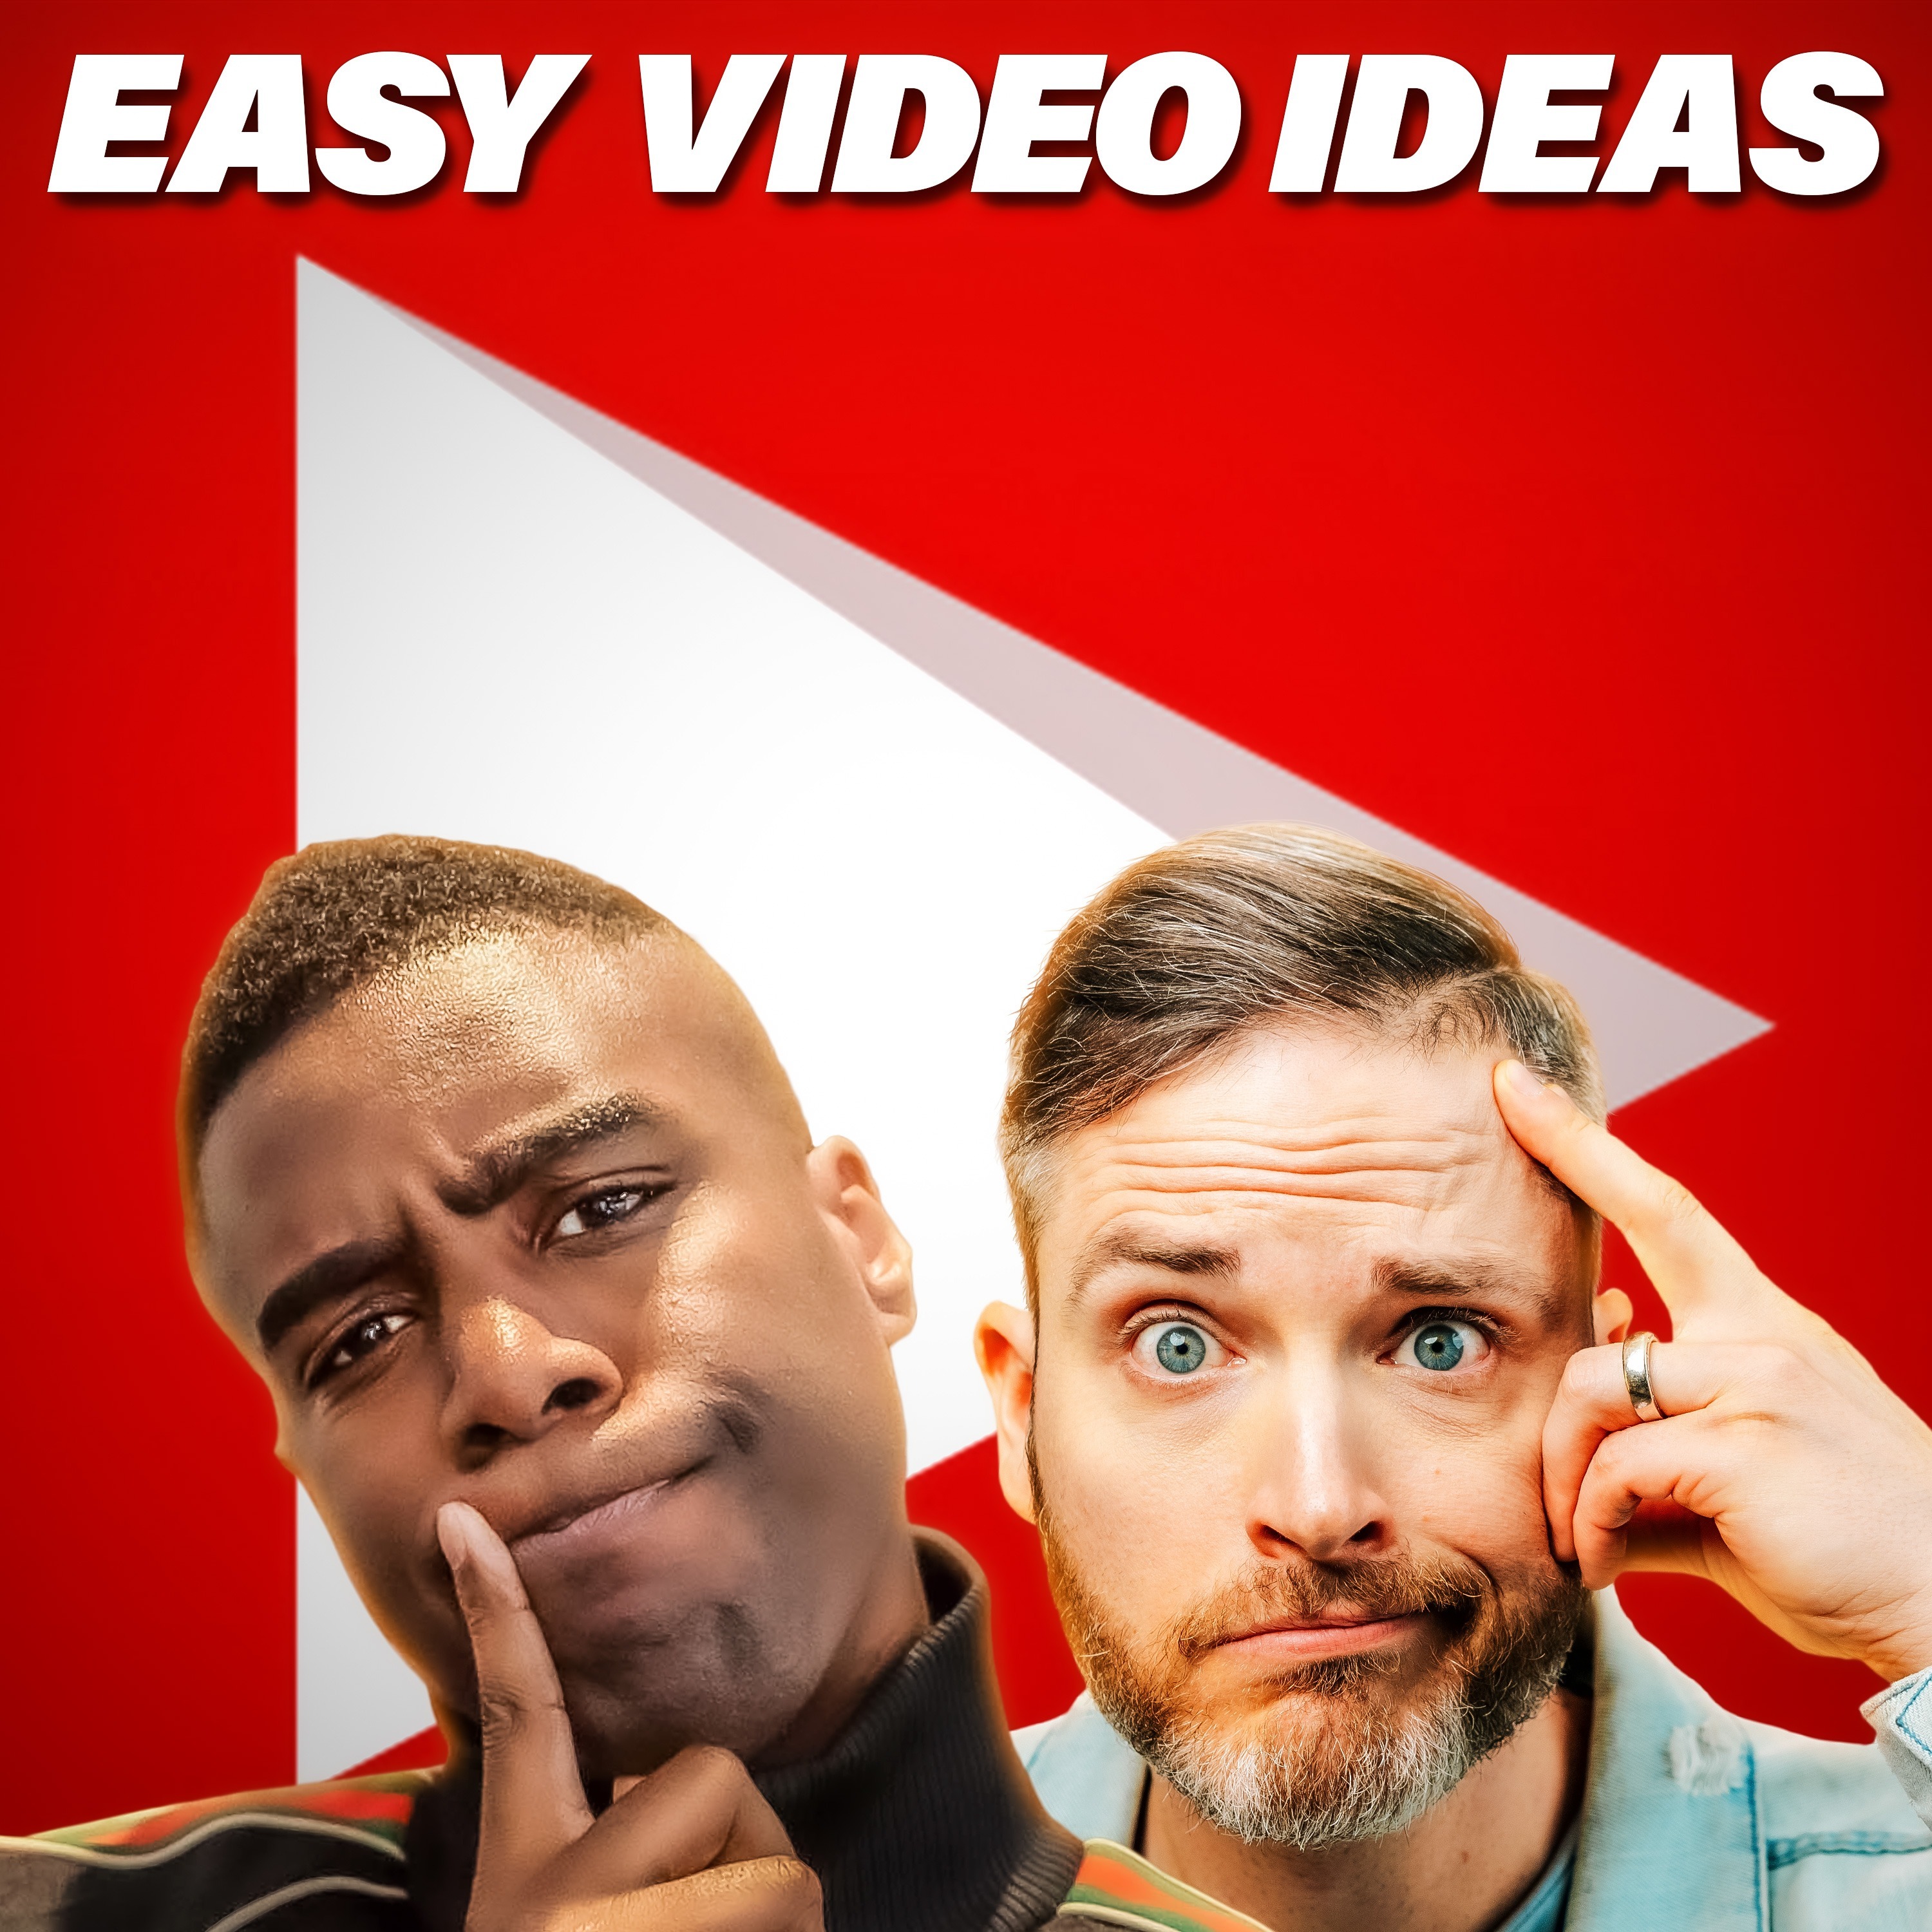 5 Types of Videos That Go VIRAL on YouTube